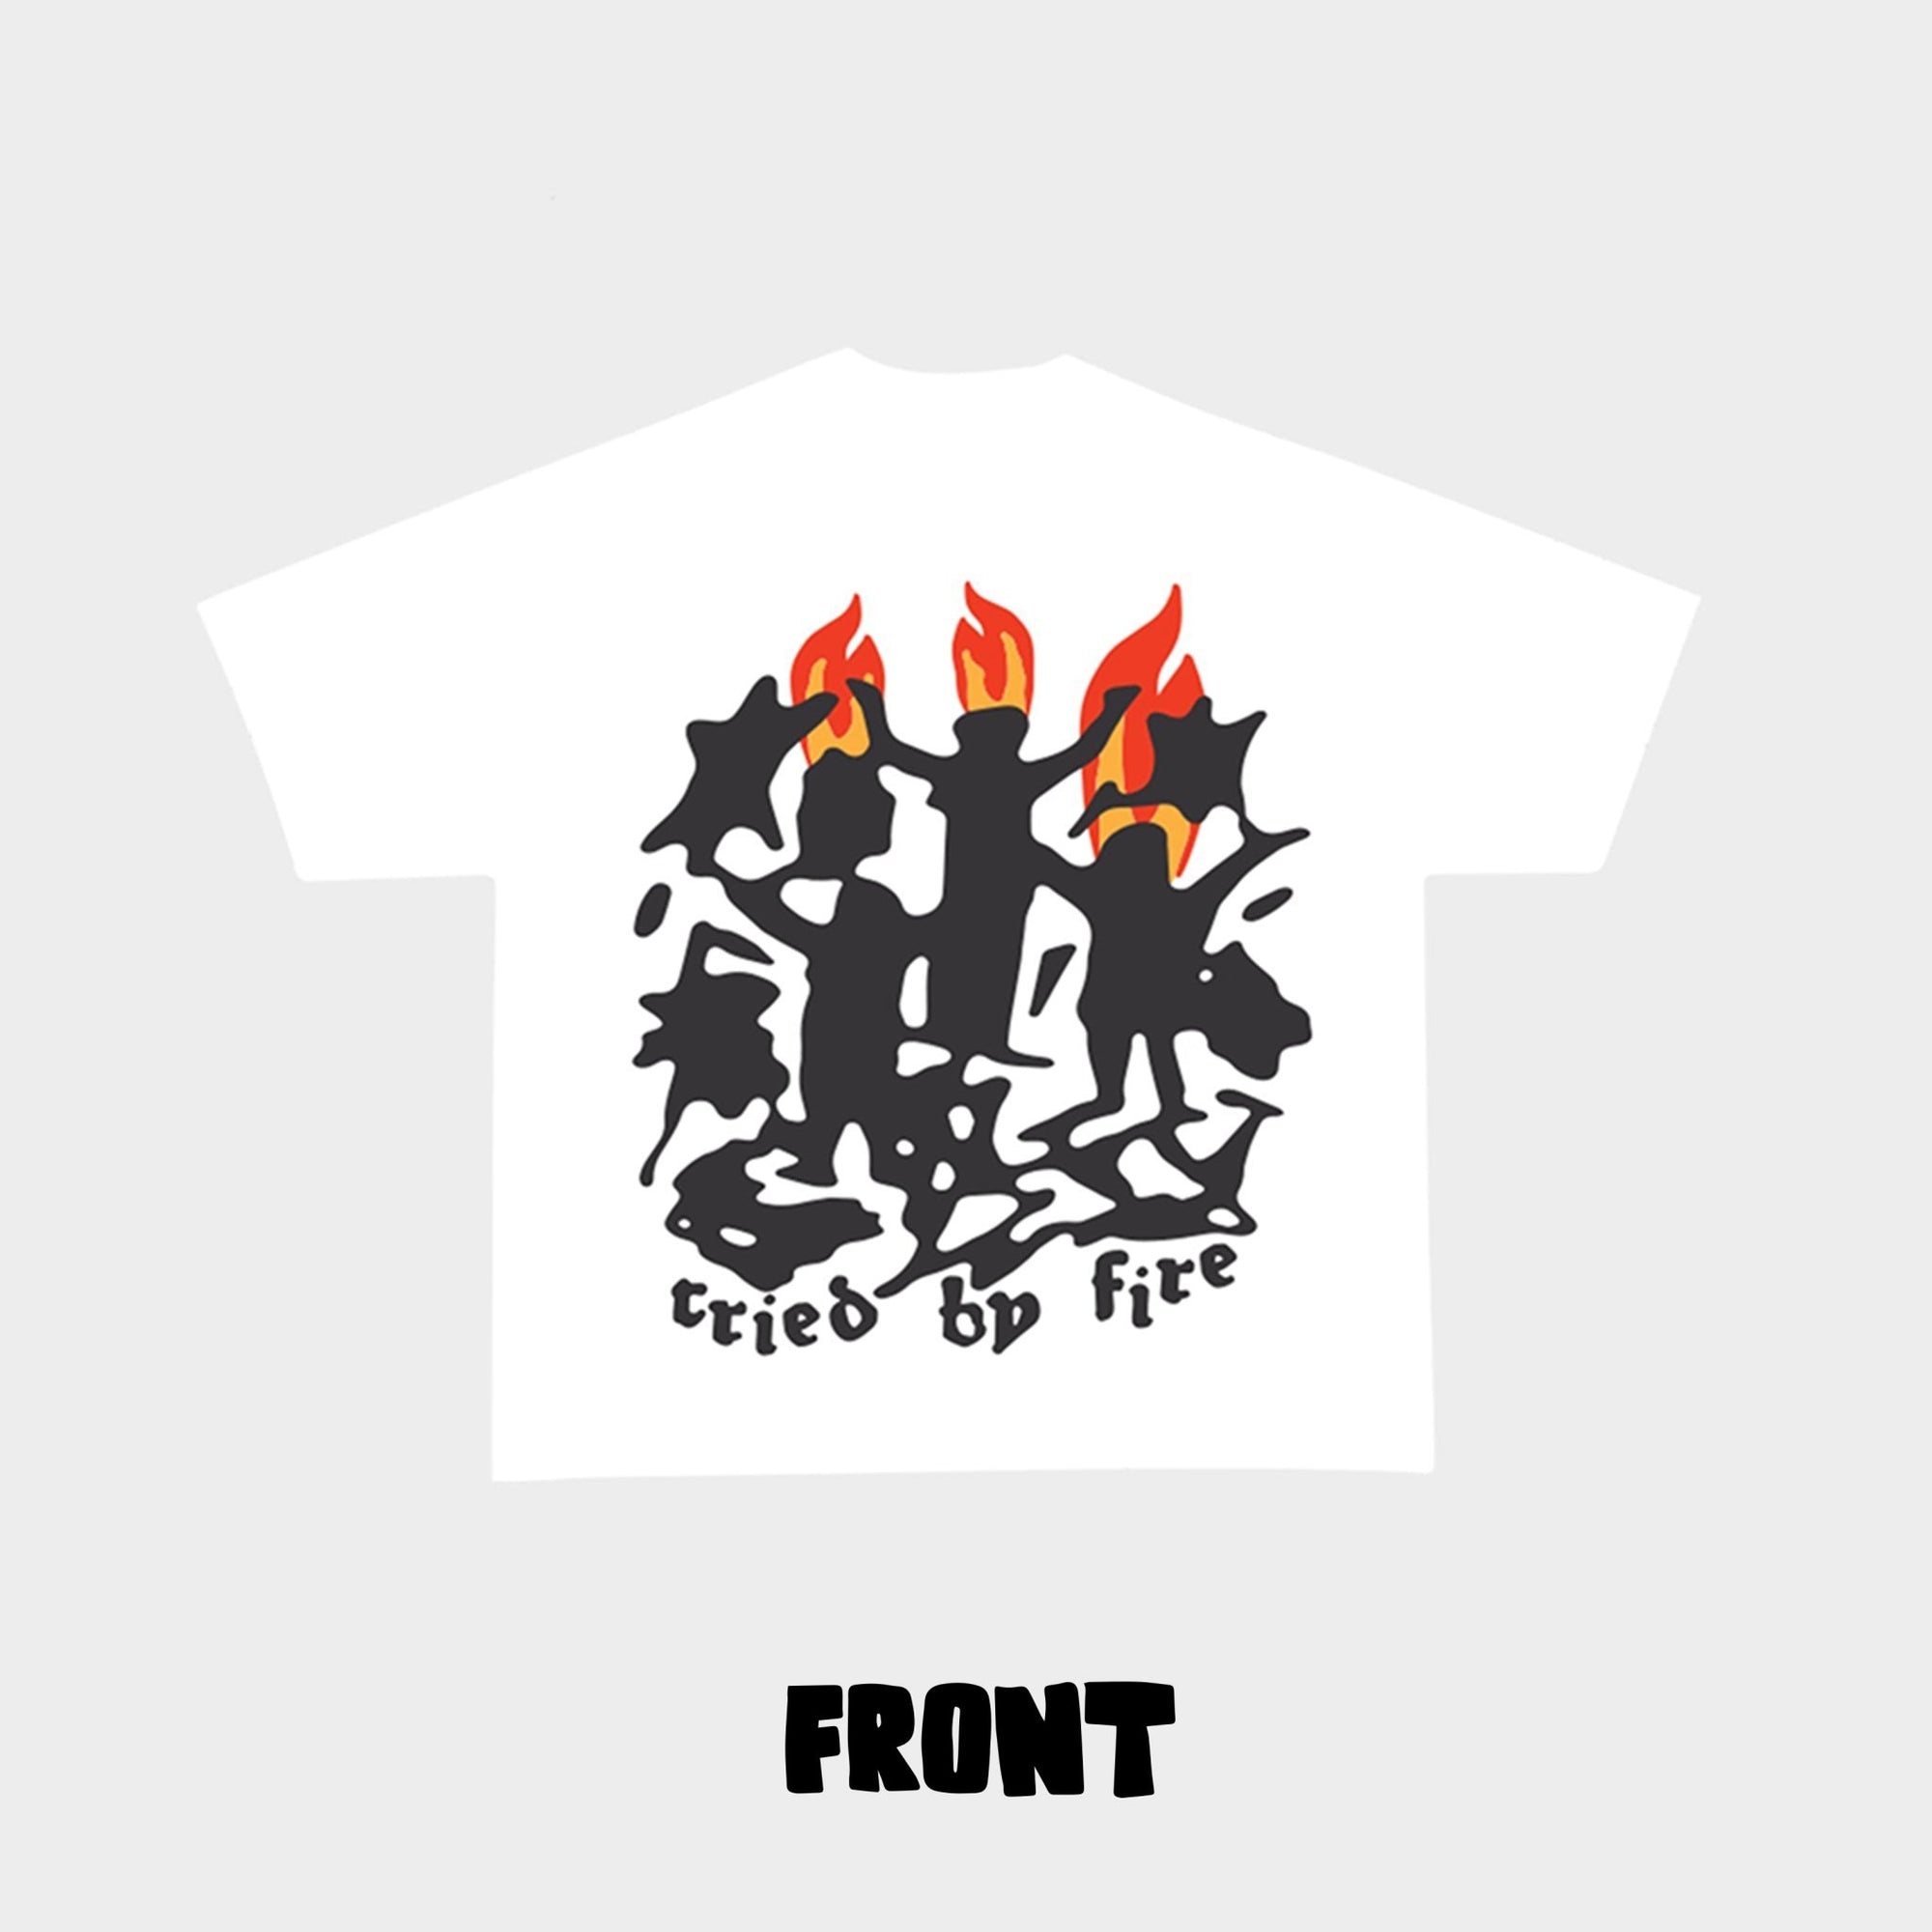 Tried By Fire Tee - RED LETTERS